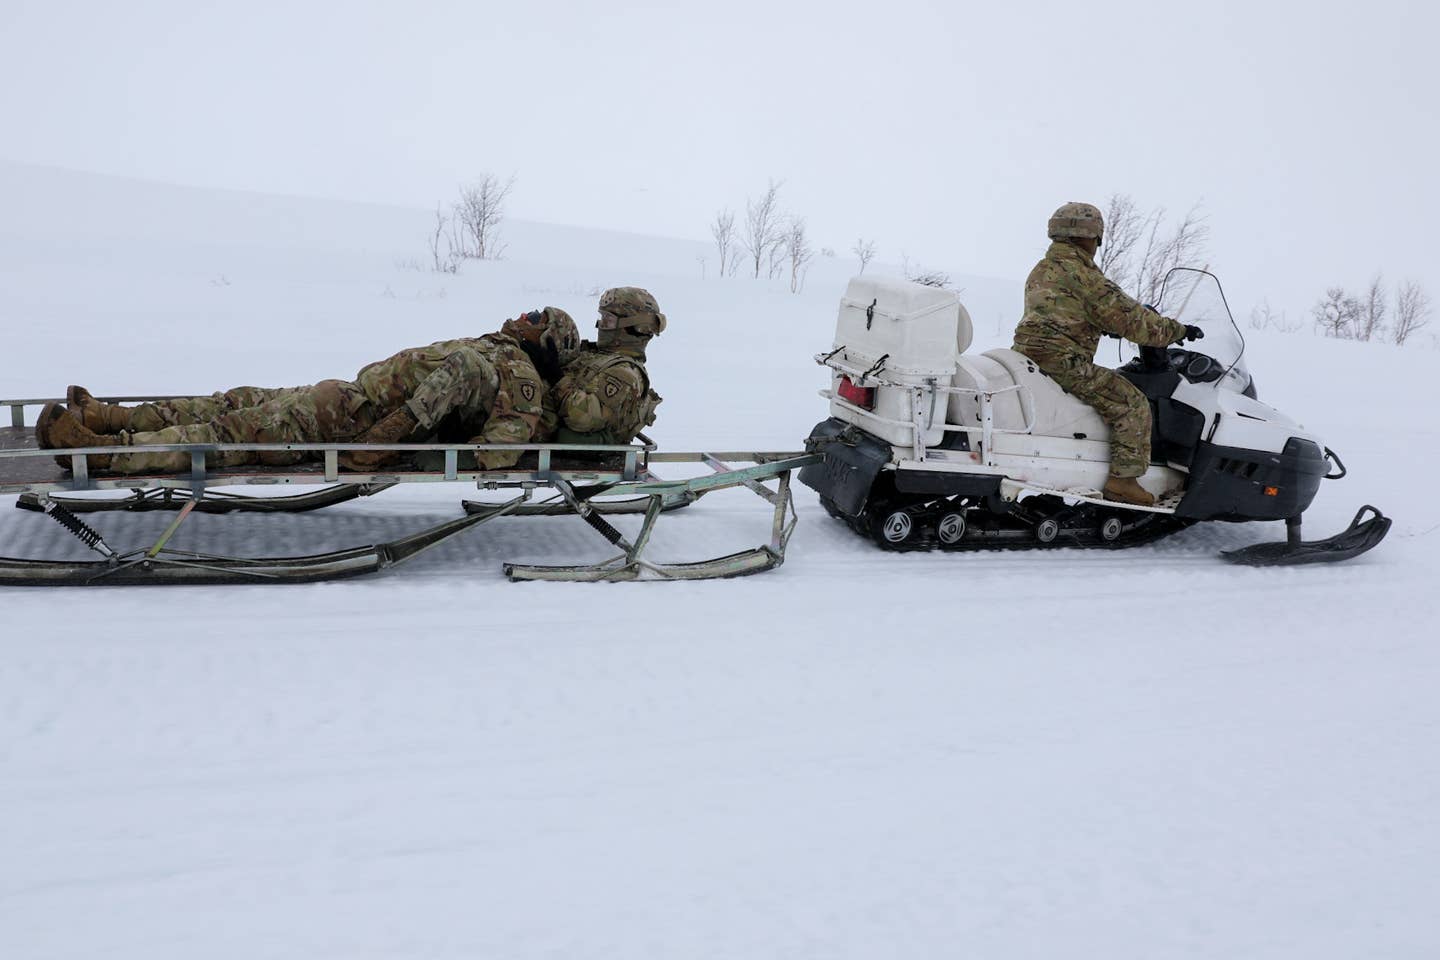 Paratroopers from the 4th Brigade Combat Team, 25th Infantry Division (Airborne) with Norwegian and Spanish allies conduct casualty evaluation training during Exercise Swift Response in May. <em>U.S. Army photo by Spc. Kendall Lewis, 40th Public Affairs Detachment</em>